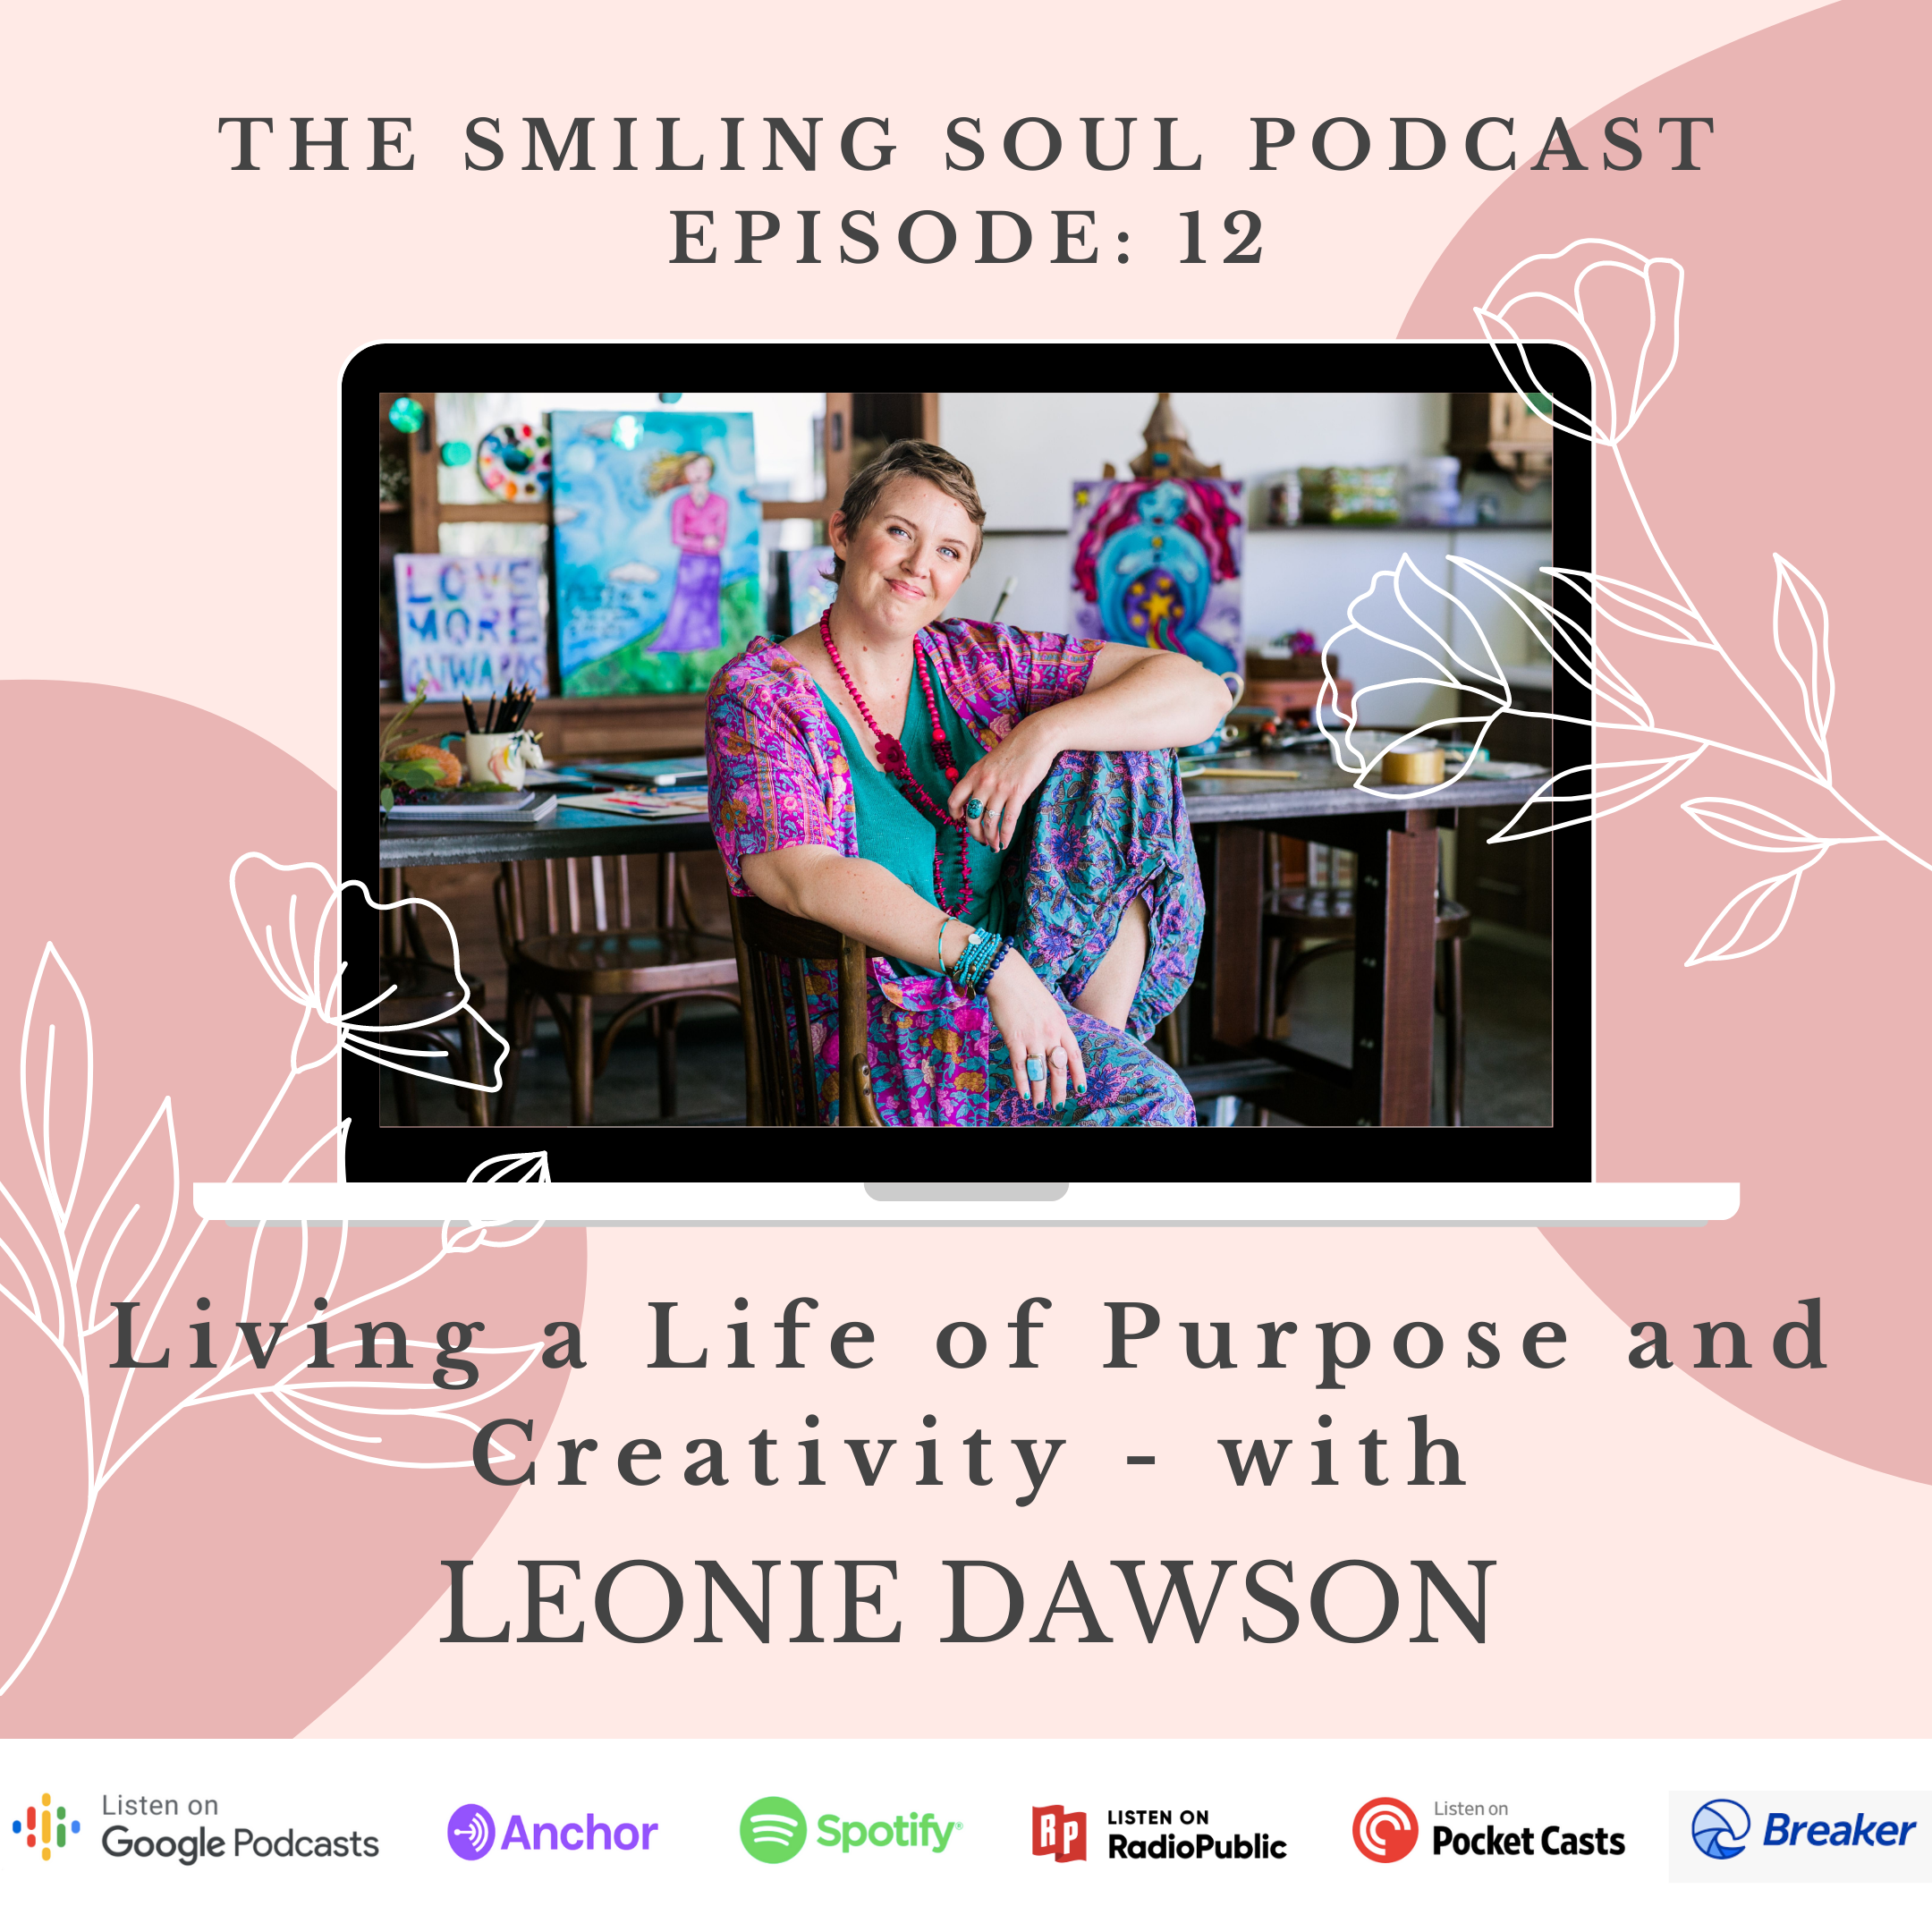 The Smiling Soul Podcast